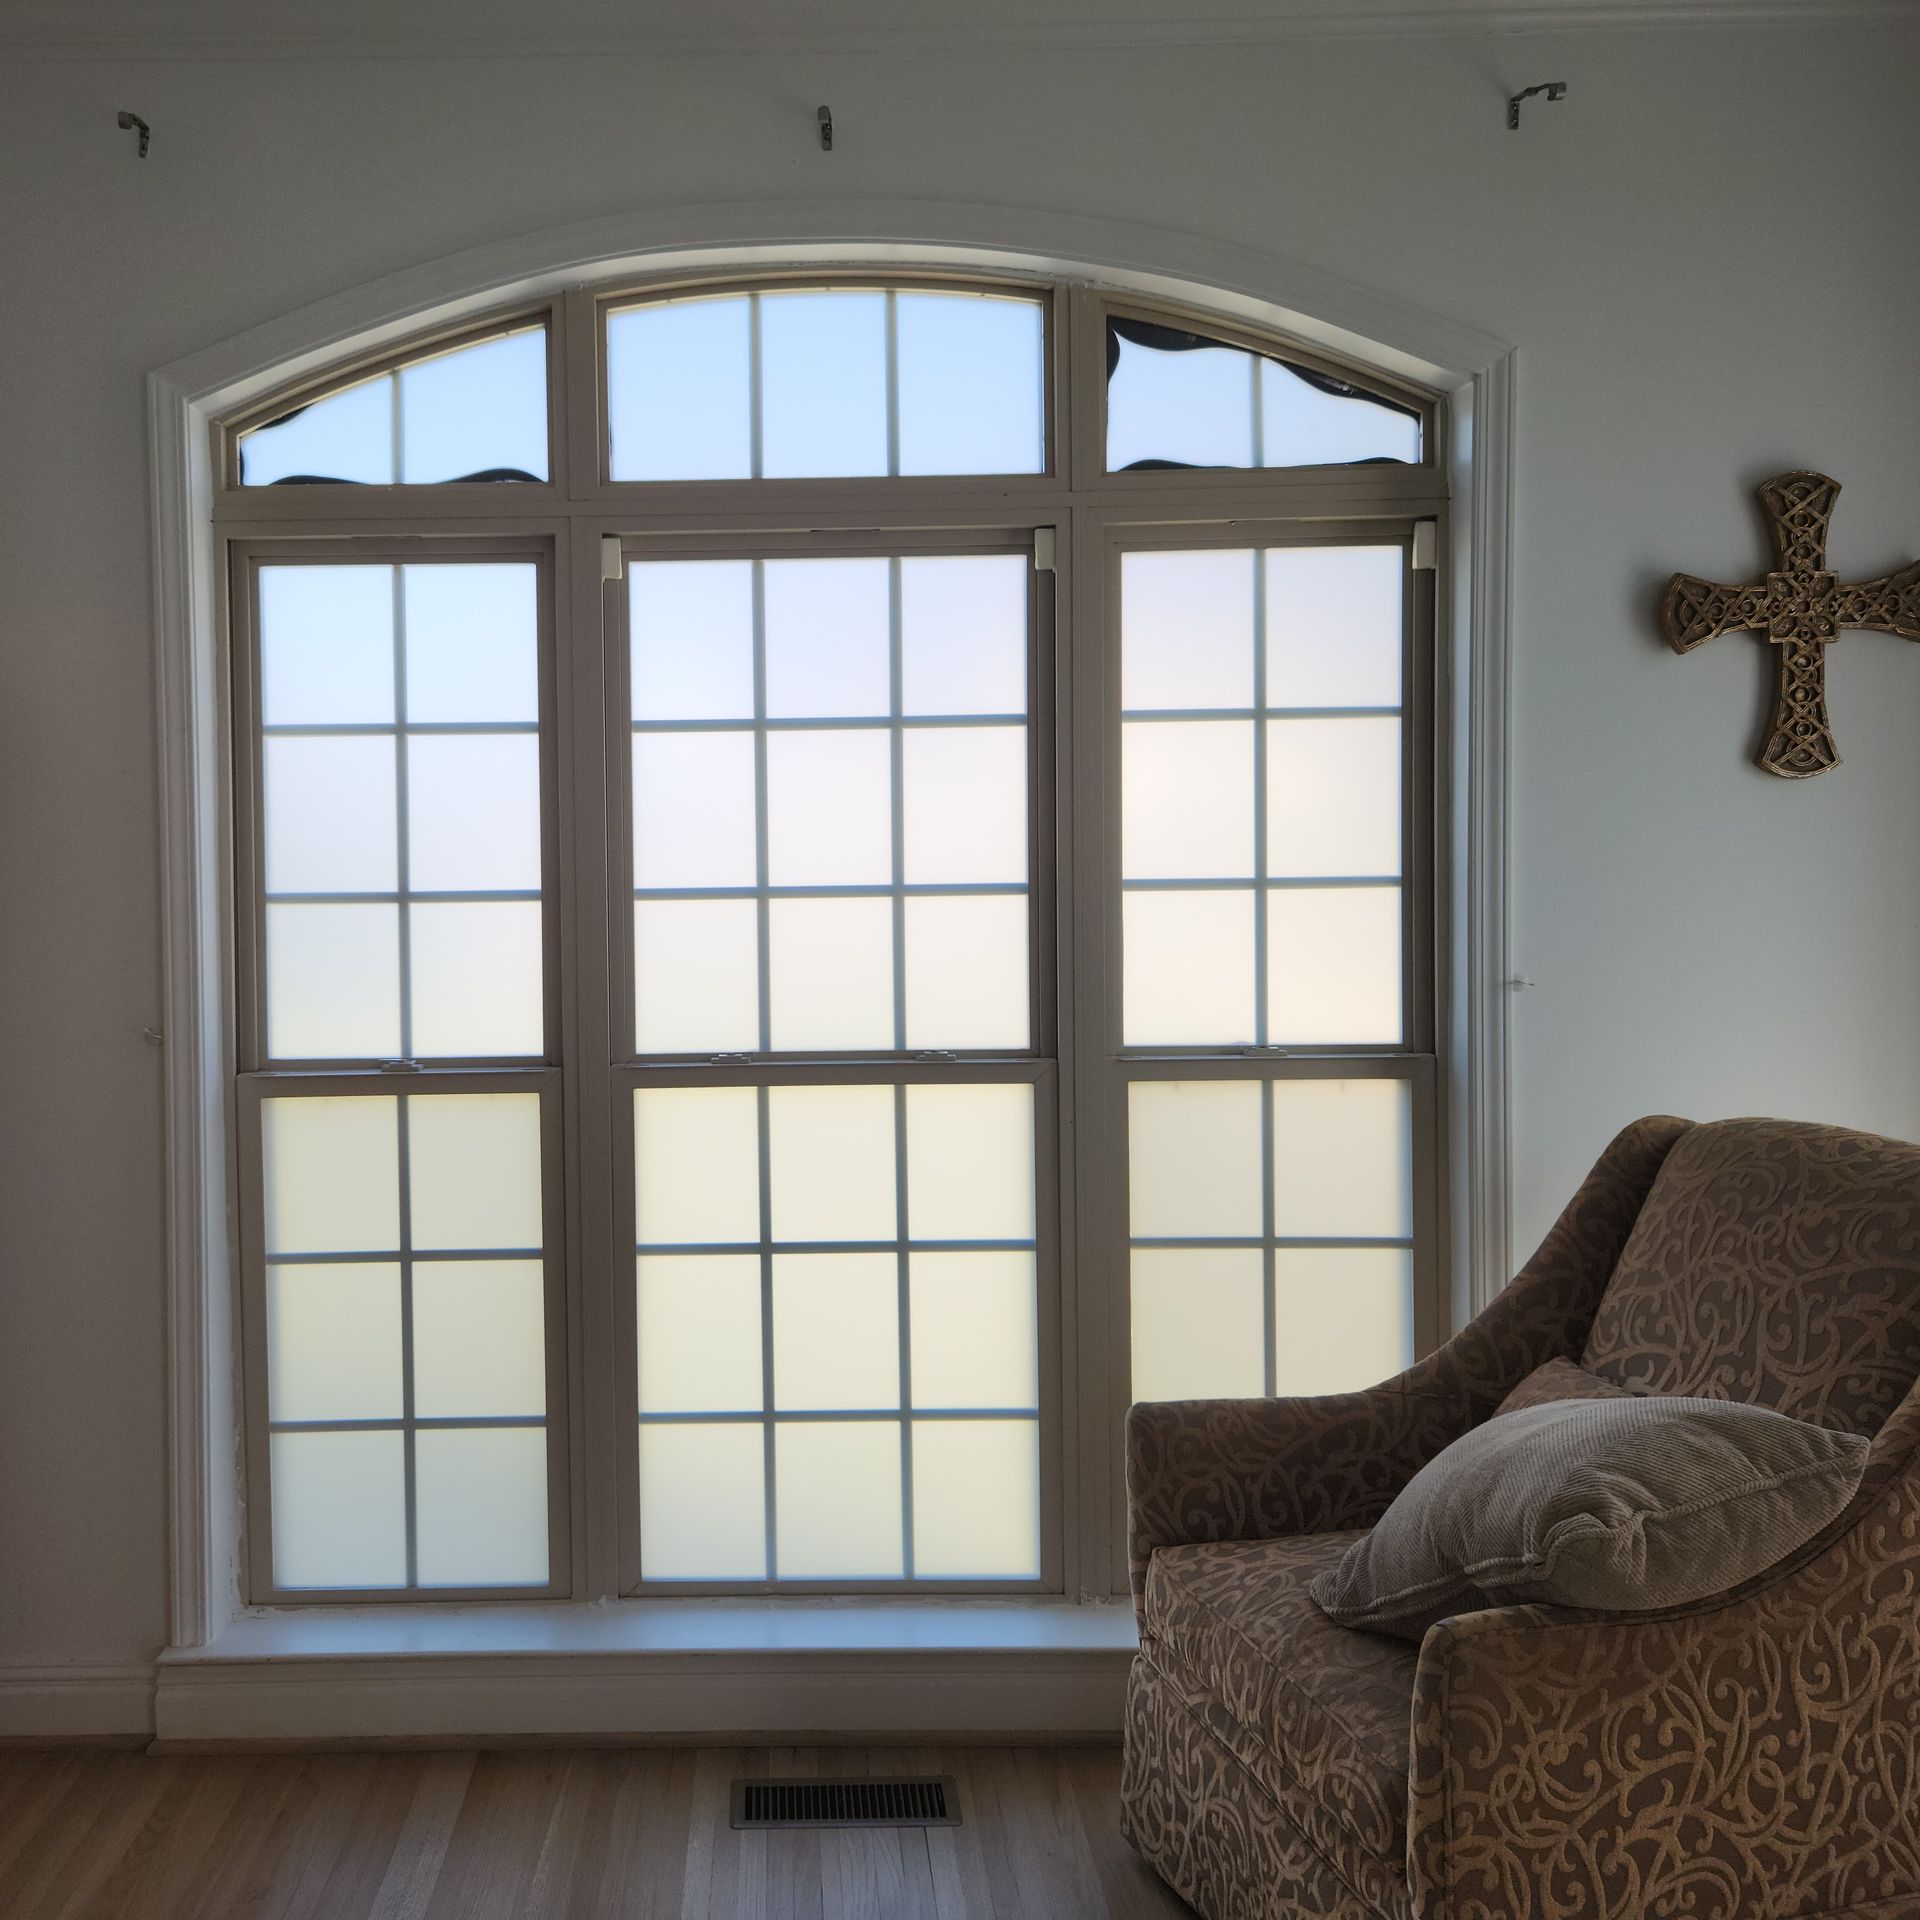 home tinting - floors and furnishings are safe from UV-Fading in AL. Glare and heat also blocked by SPF Tint